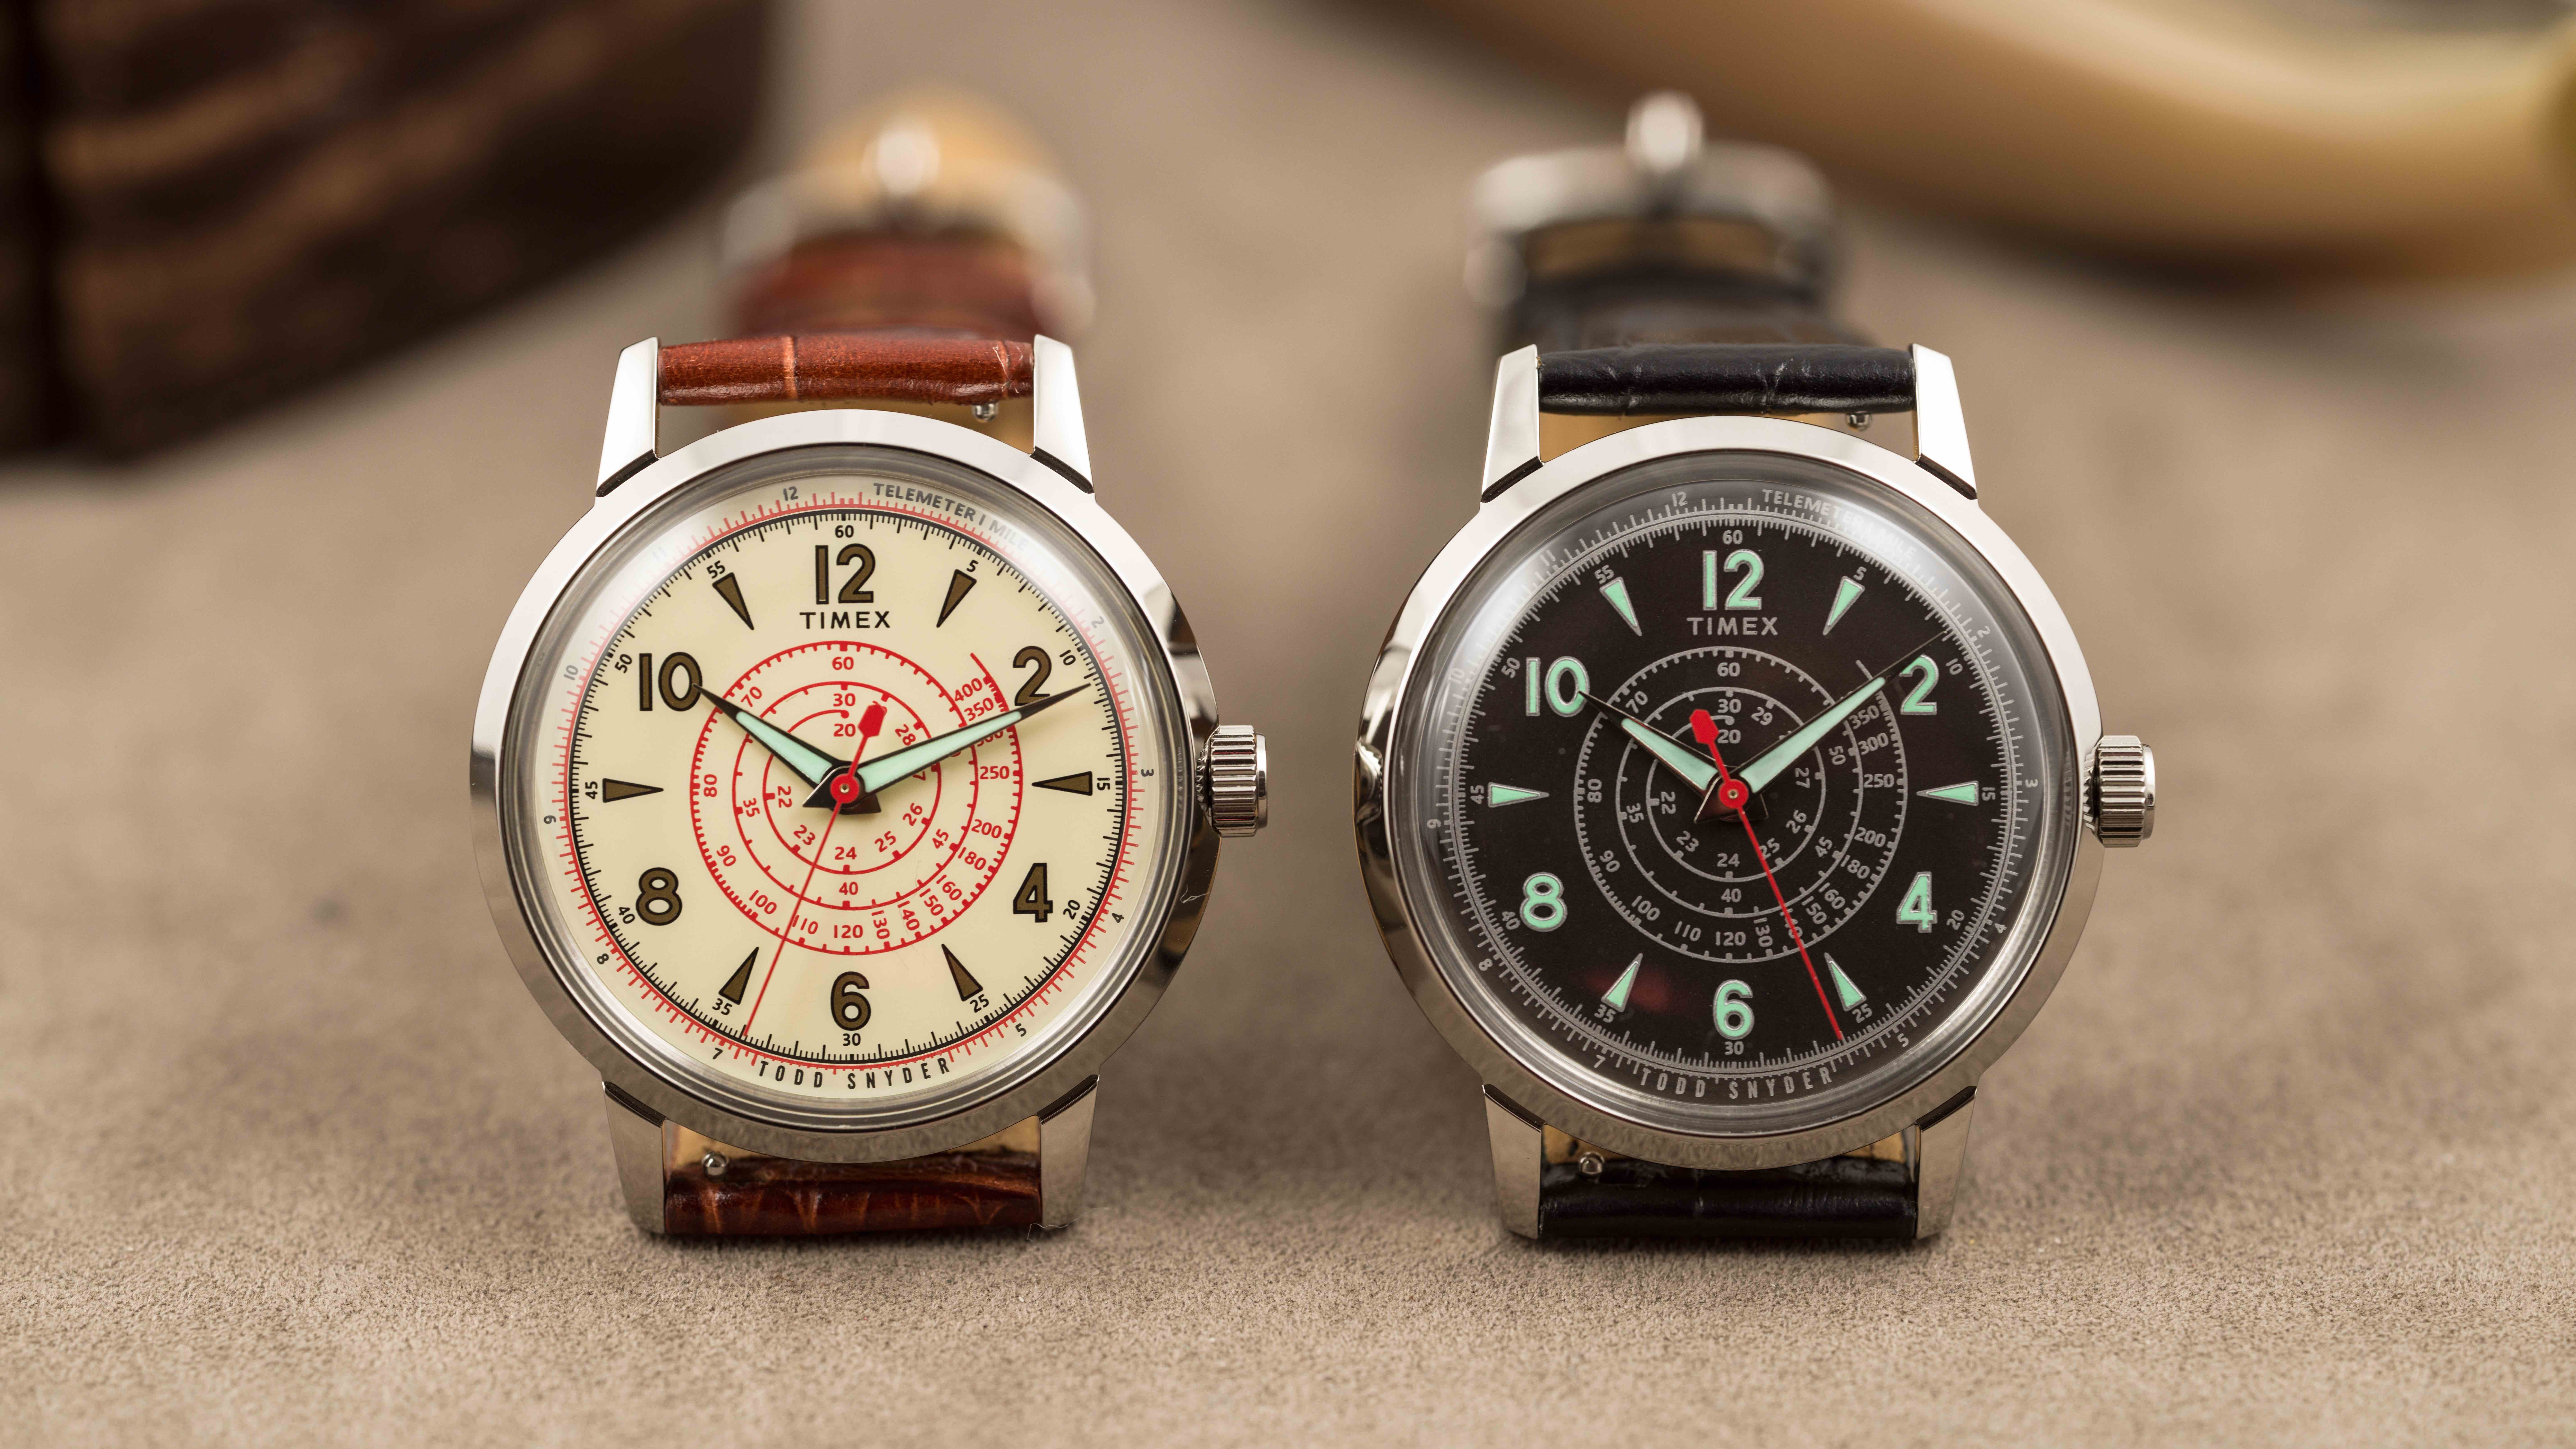 Introducing: The Timex x Todd Snyder Beekman (Live Pics & Pricing